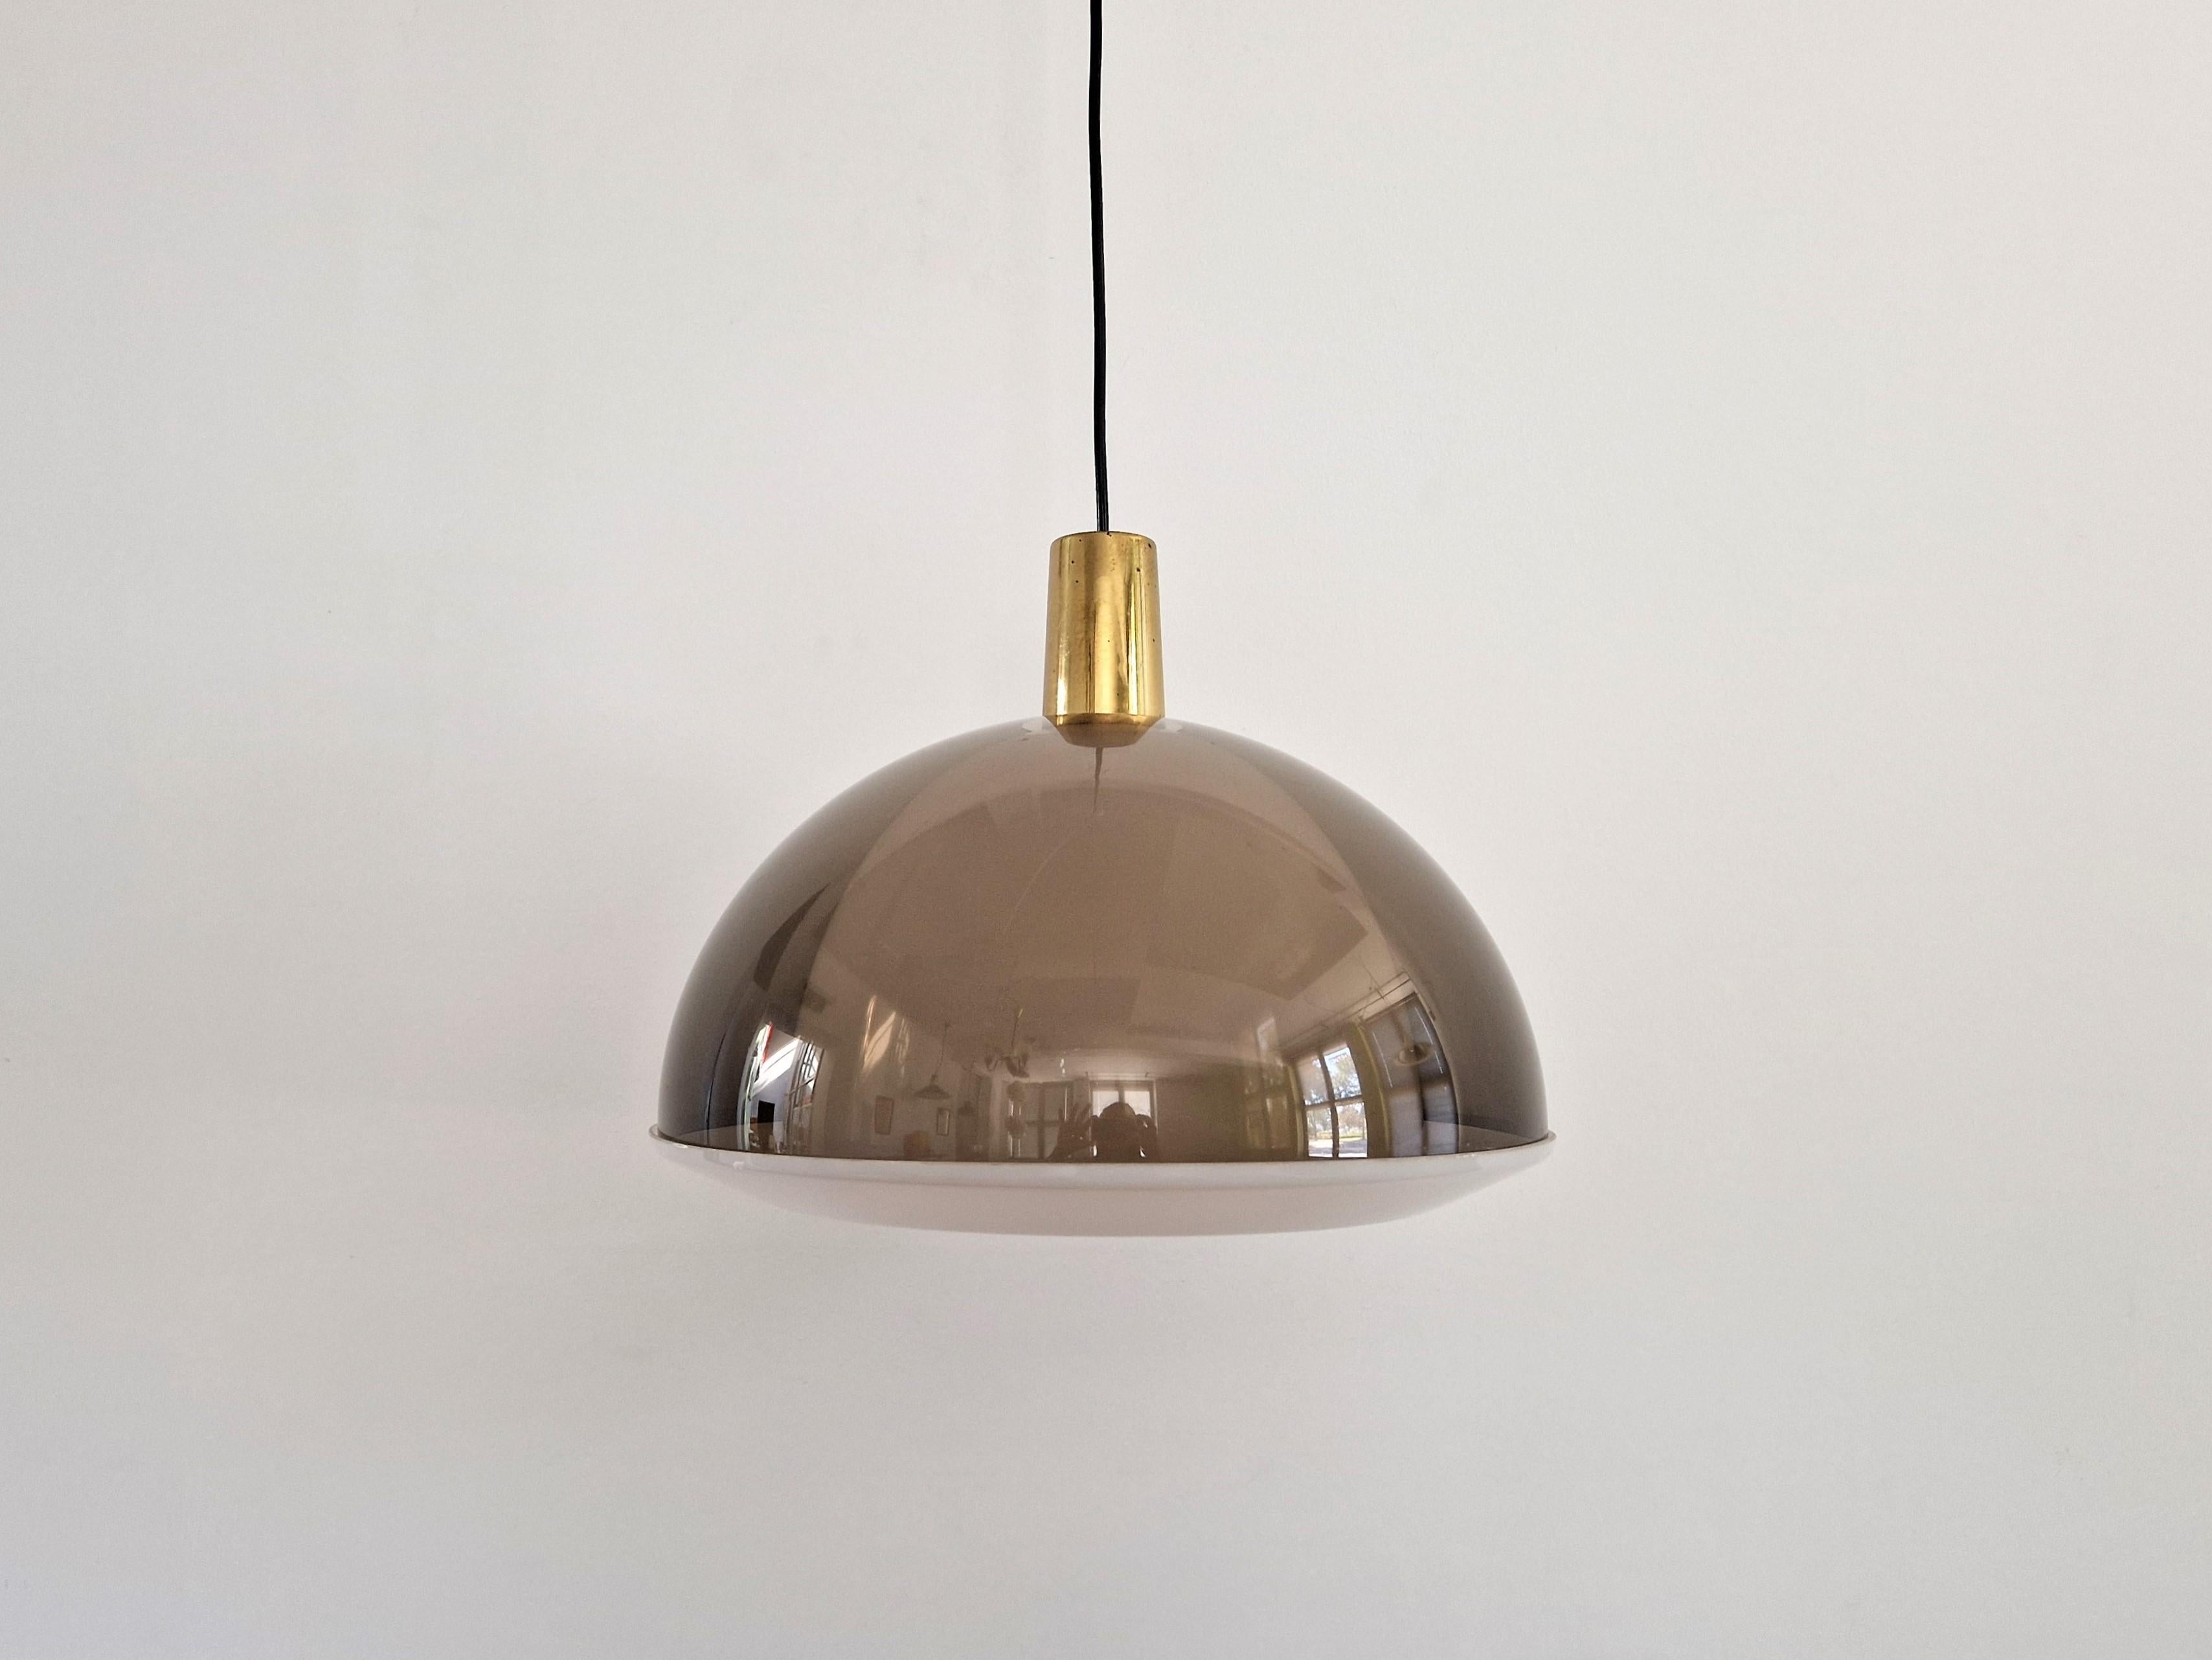 This stunning 'Kuplat' pendant was designed by the Finnish designer Yki Nummi in 1959. This piece is of a vintage edition. A true timeless design classic, suitable for many spaces. The name Kuplat means bubbles in Finnish. The lamp has two acrylic